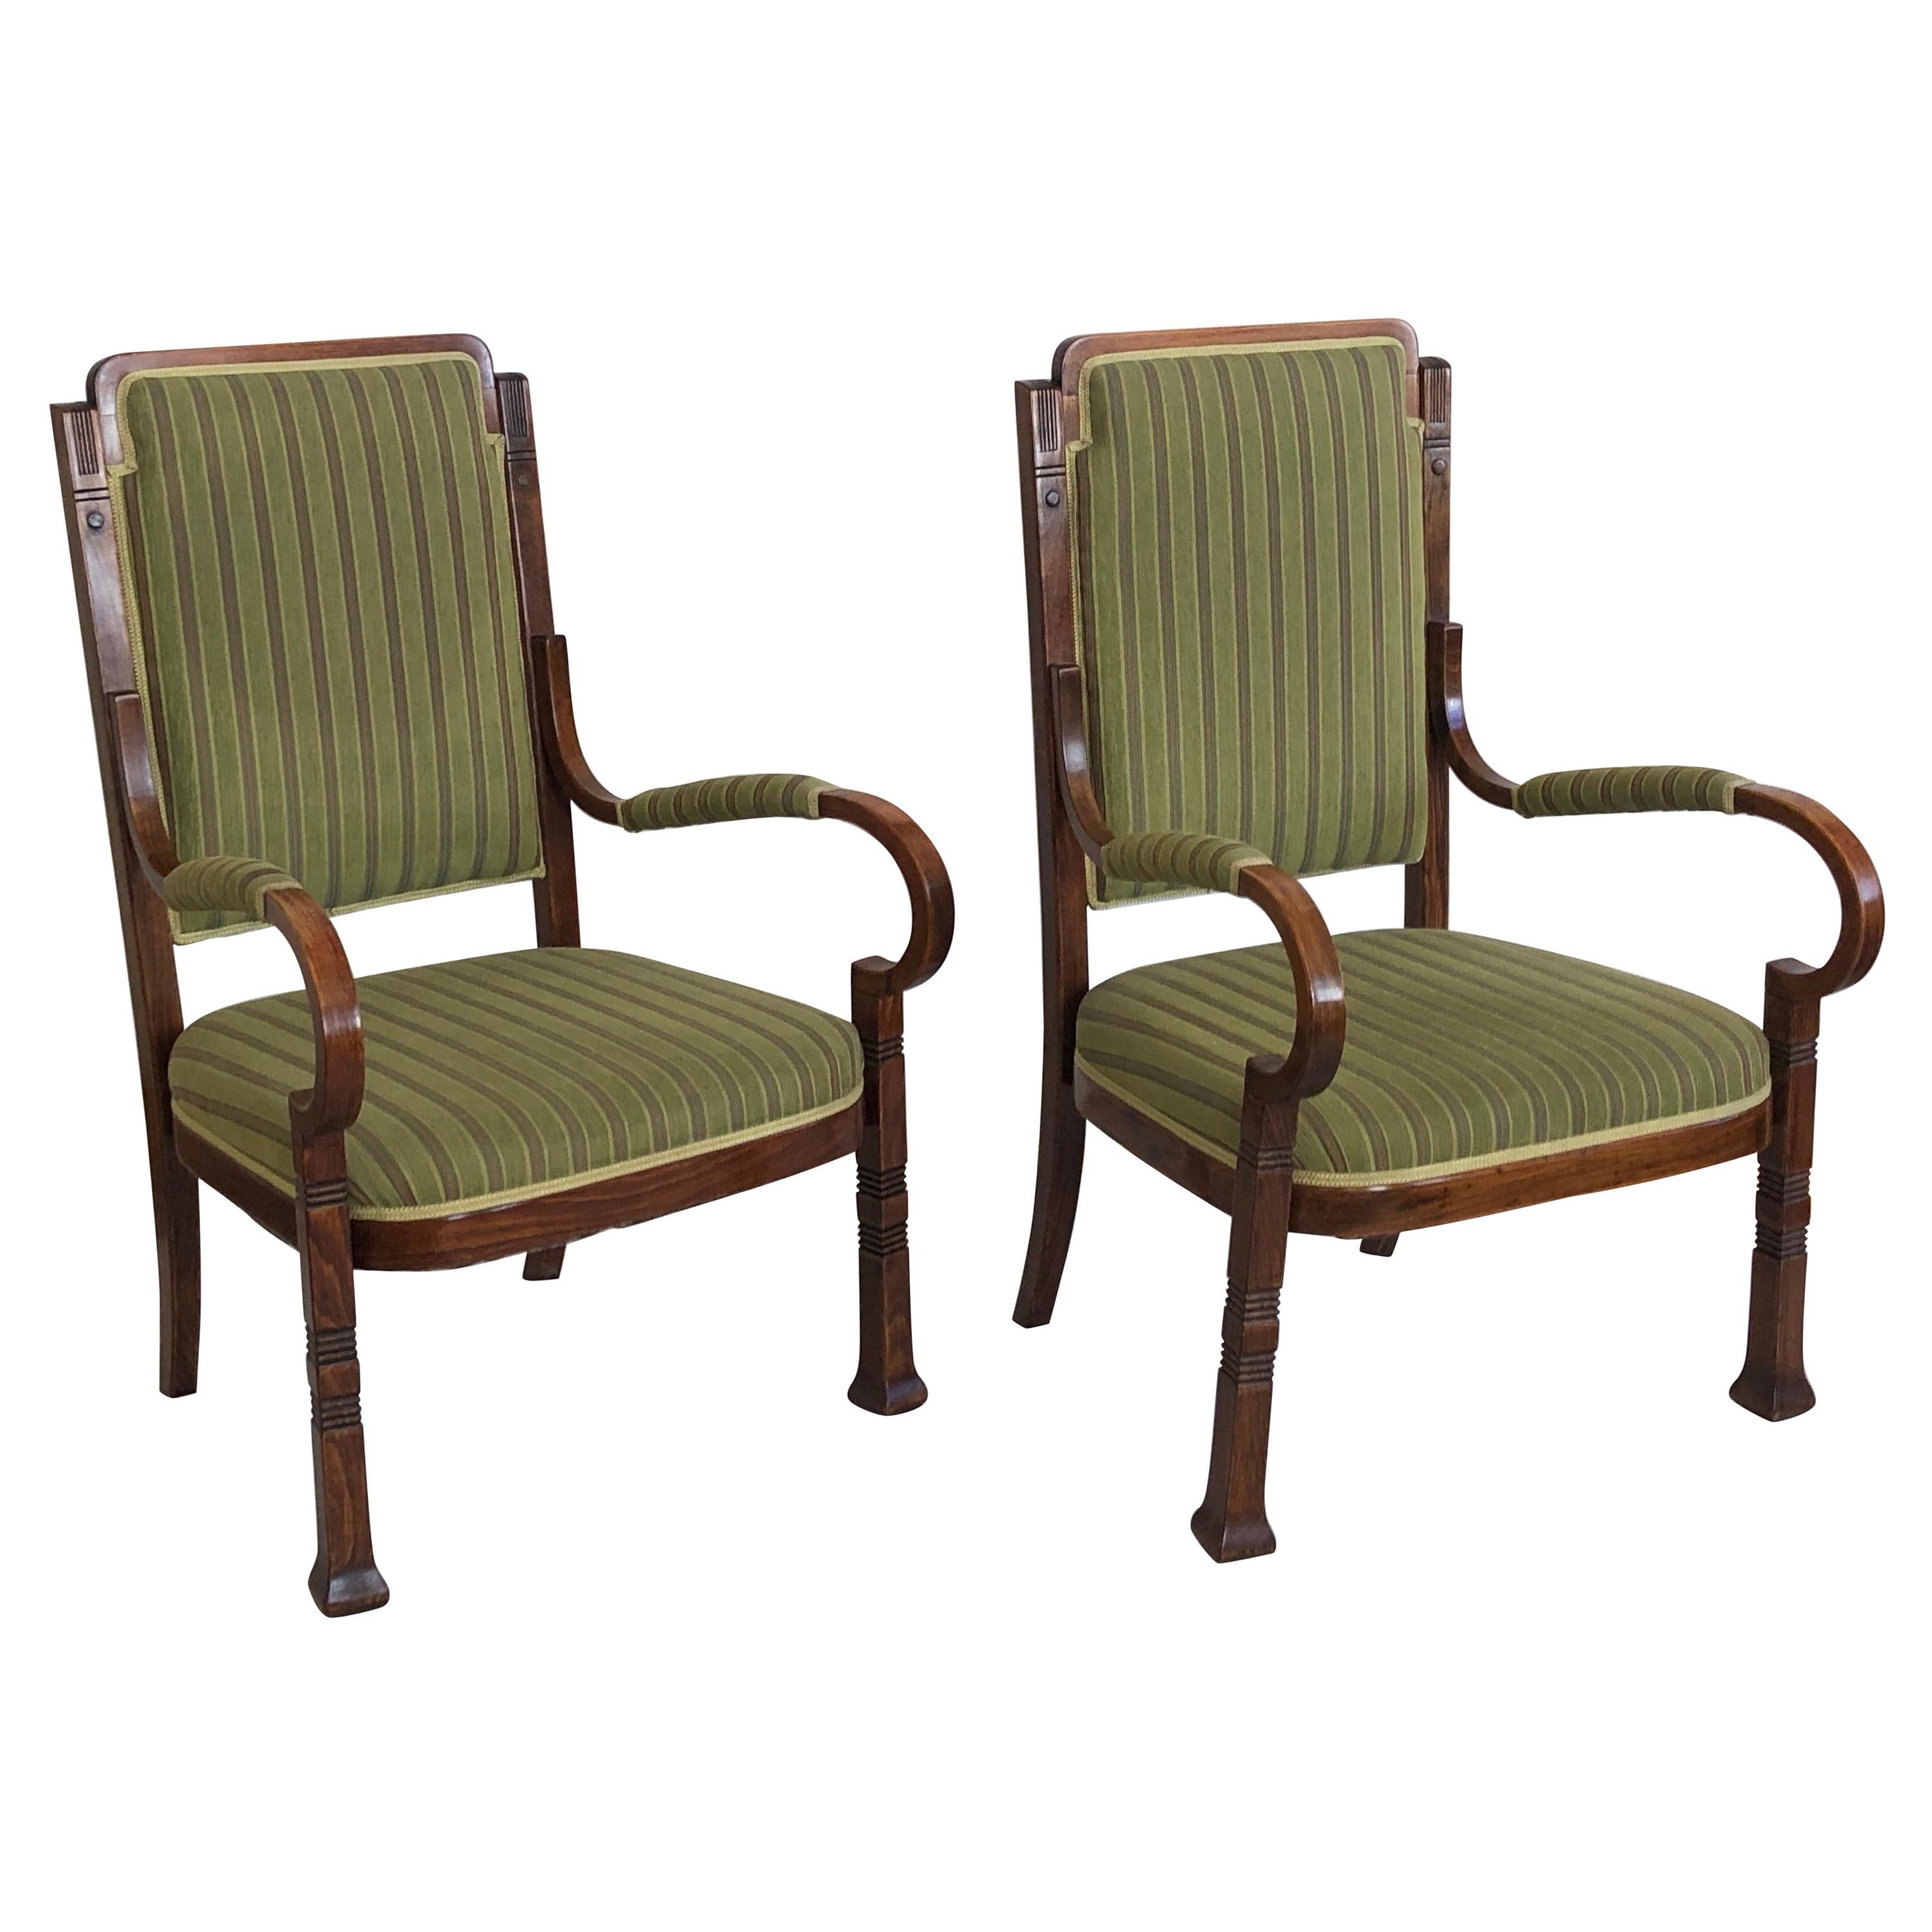 Rare Salon Armchairs Nr. 14 by Thonet, Set of Two For Sale